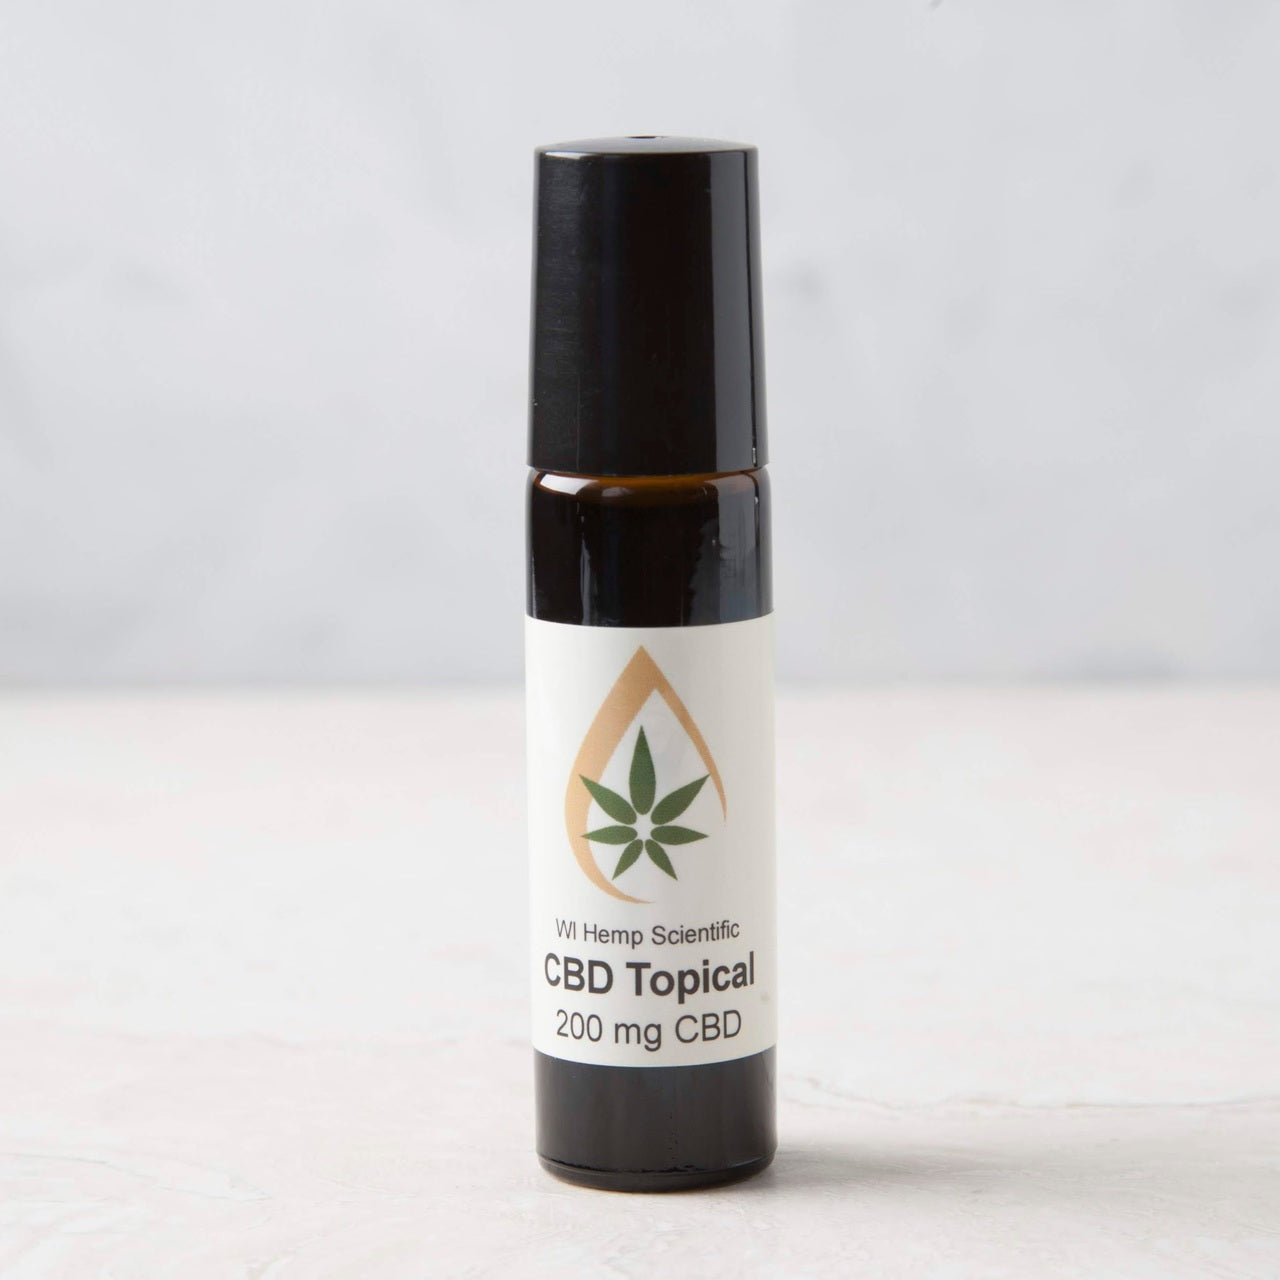 The 200 mg. Hemp Oil Topical from Wisconsin Hemp Scientific provides fast acting relief for acute sudden onset of pain. The grape seed carrier oil penetrates the skin, providing deep pain relief. Roll-on for easy, no-mess application. 